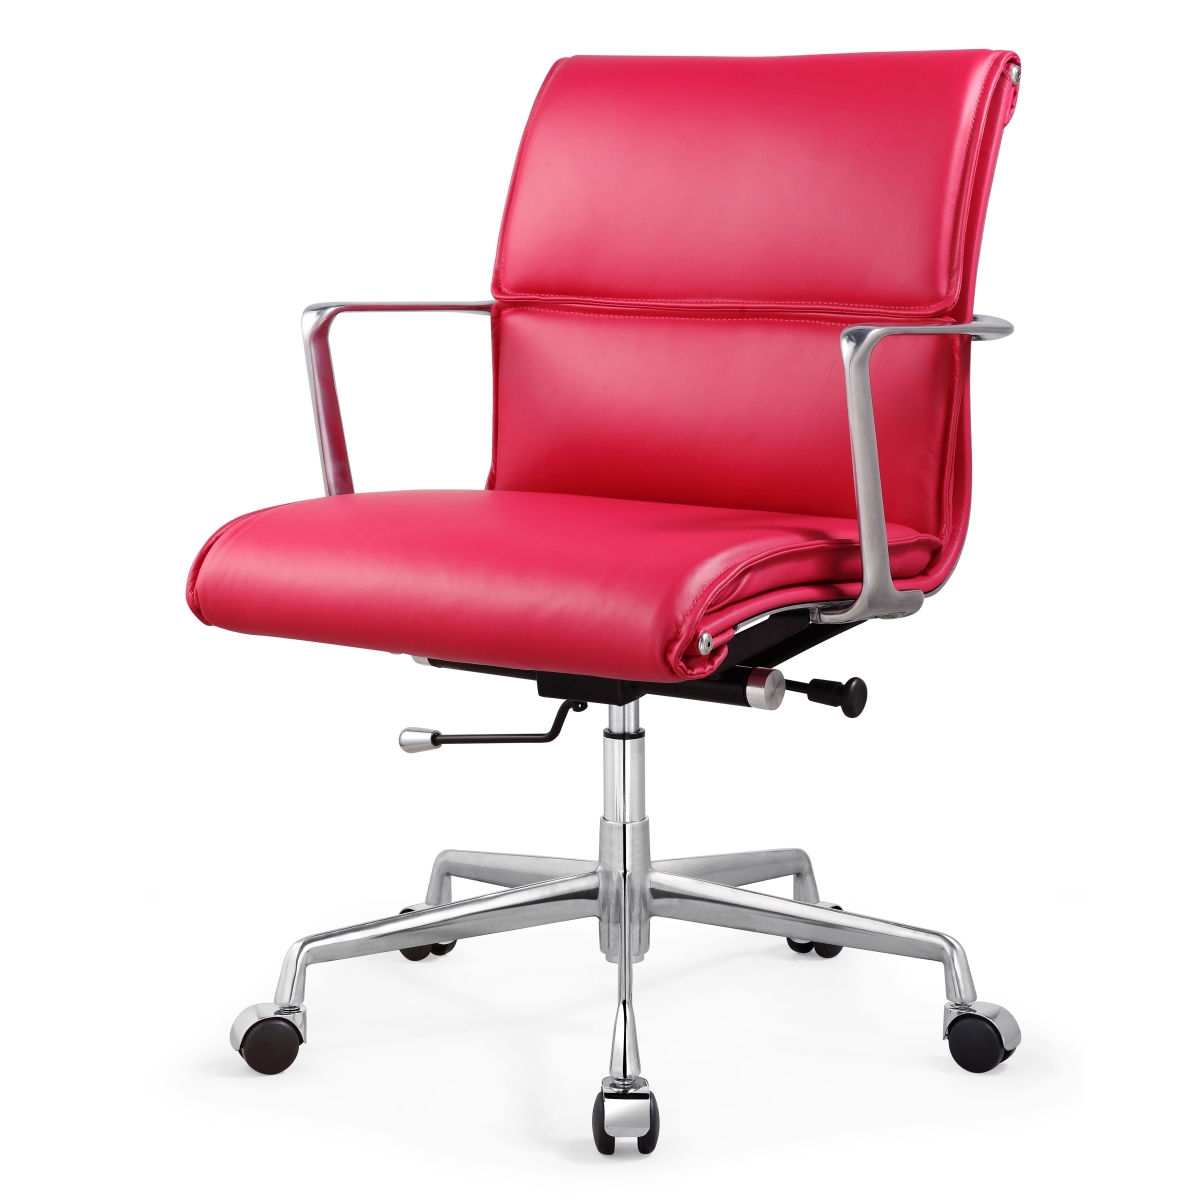 347-pnk M347 Office Chair In Aniline Leather - Aluminum & Deep Pink